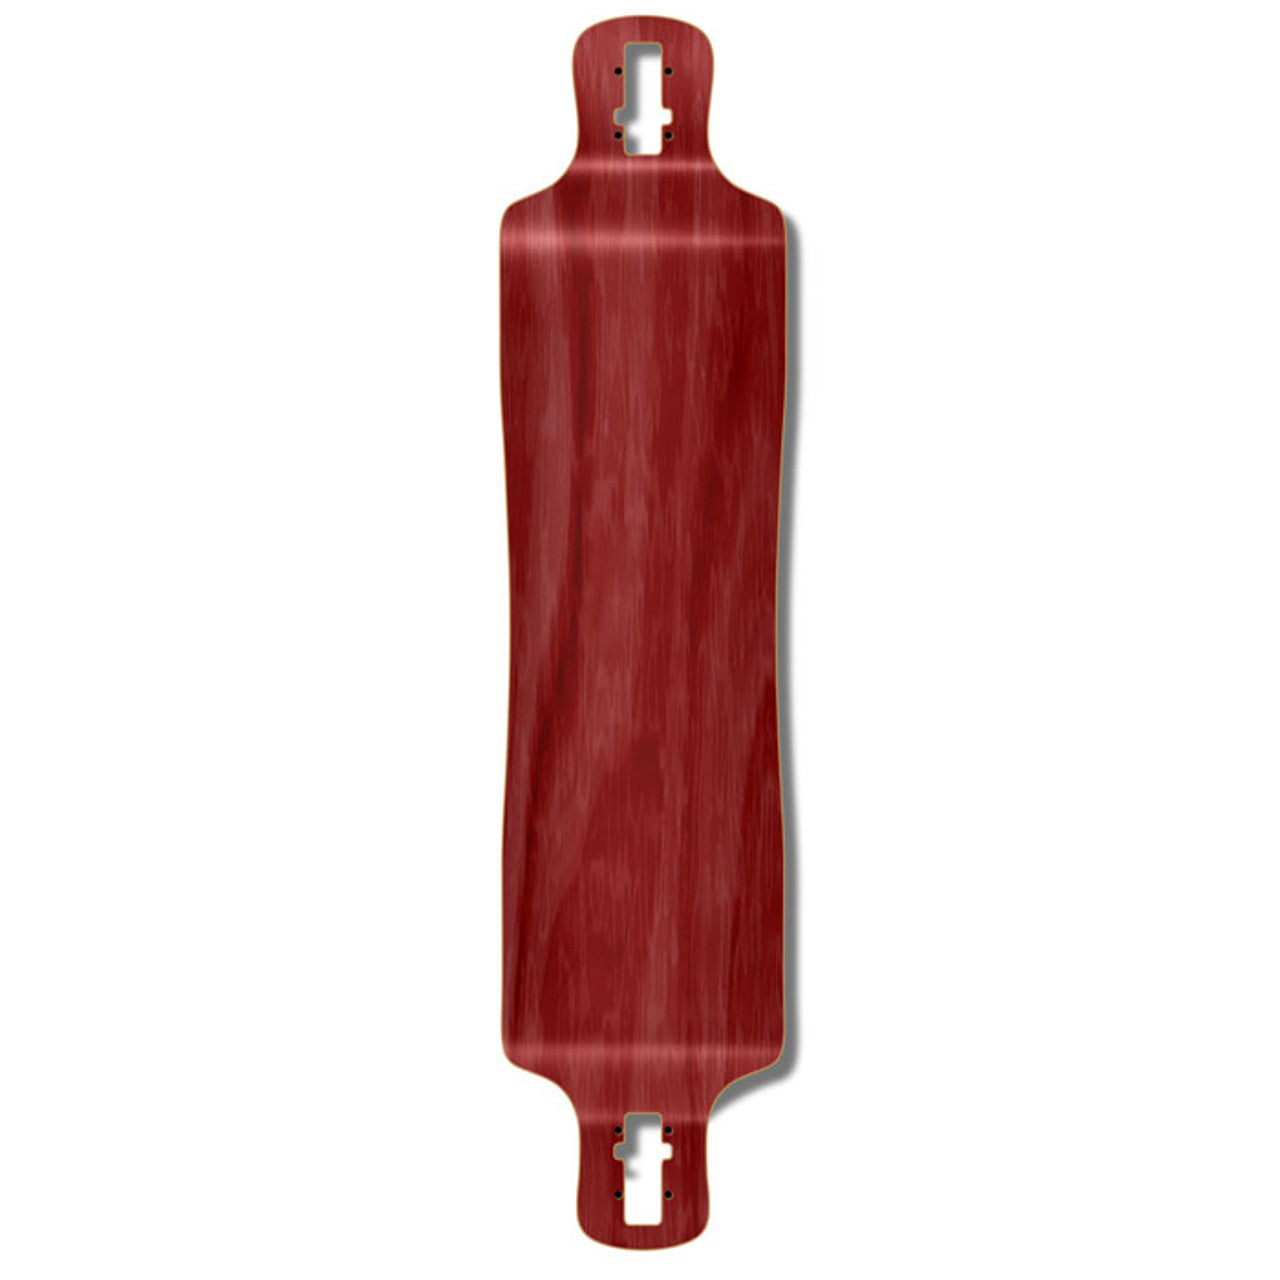 Yocaher Lowrider Longboard Deck - Stained Red